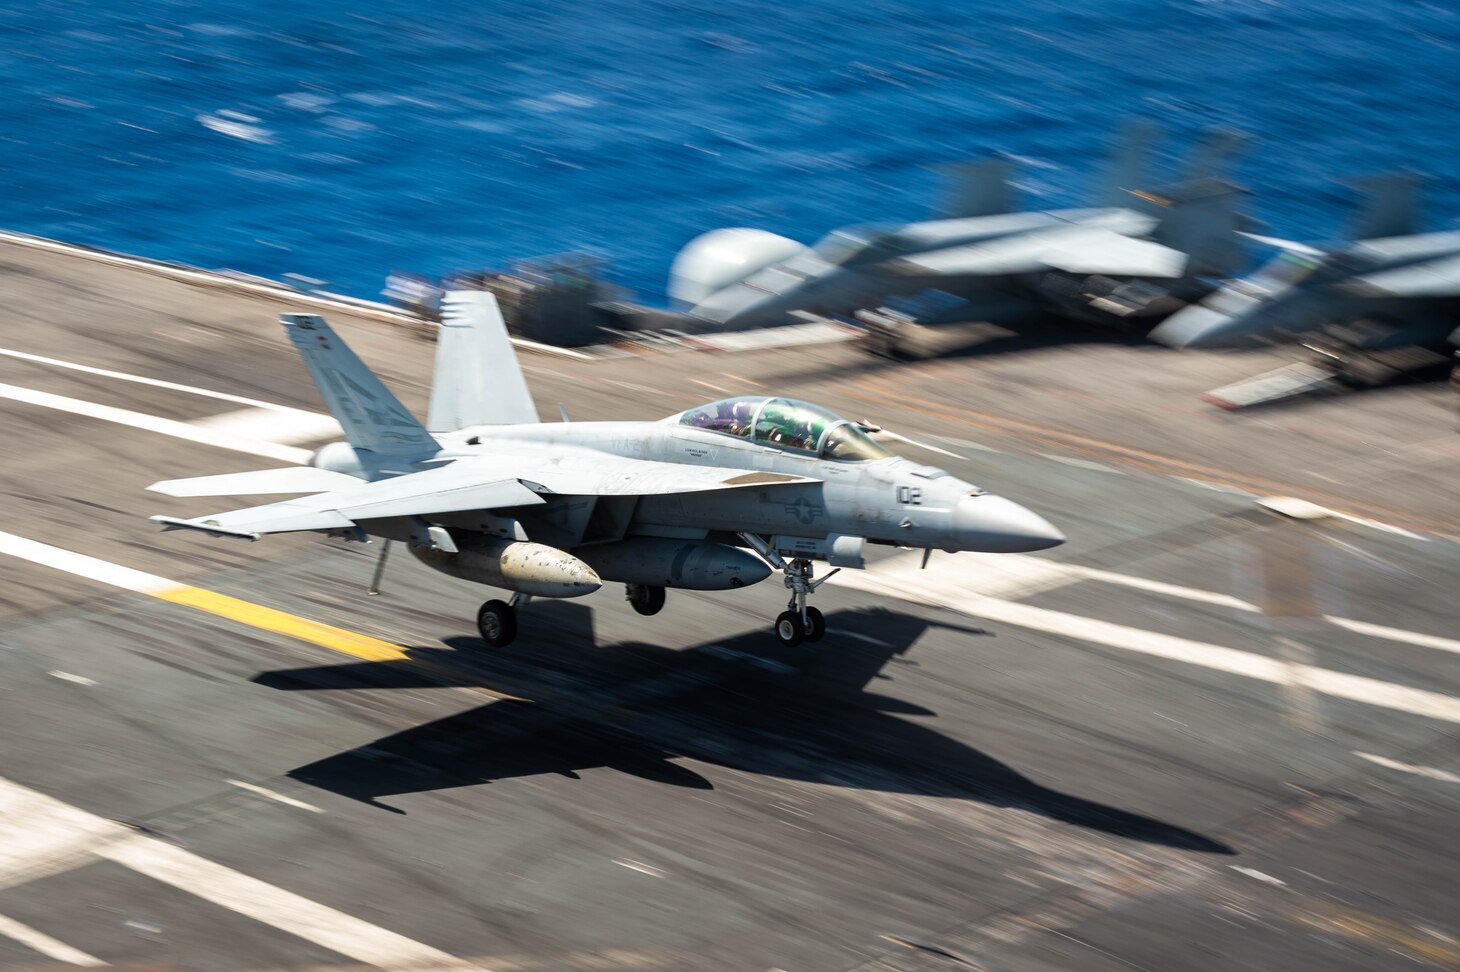 An F/A-18F Super Hornet, assigned to the “Bounty Hunters” of Strike Fighter Squadron (VFA) 2, recovers on the flight deck of the Nimitz-class aircraft carrier USS Carl Vinson (CVN 70).